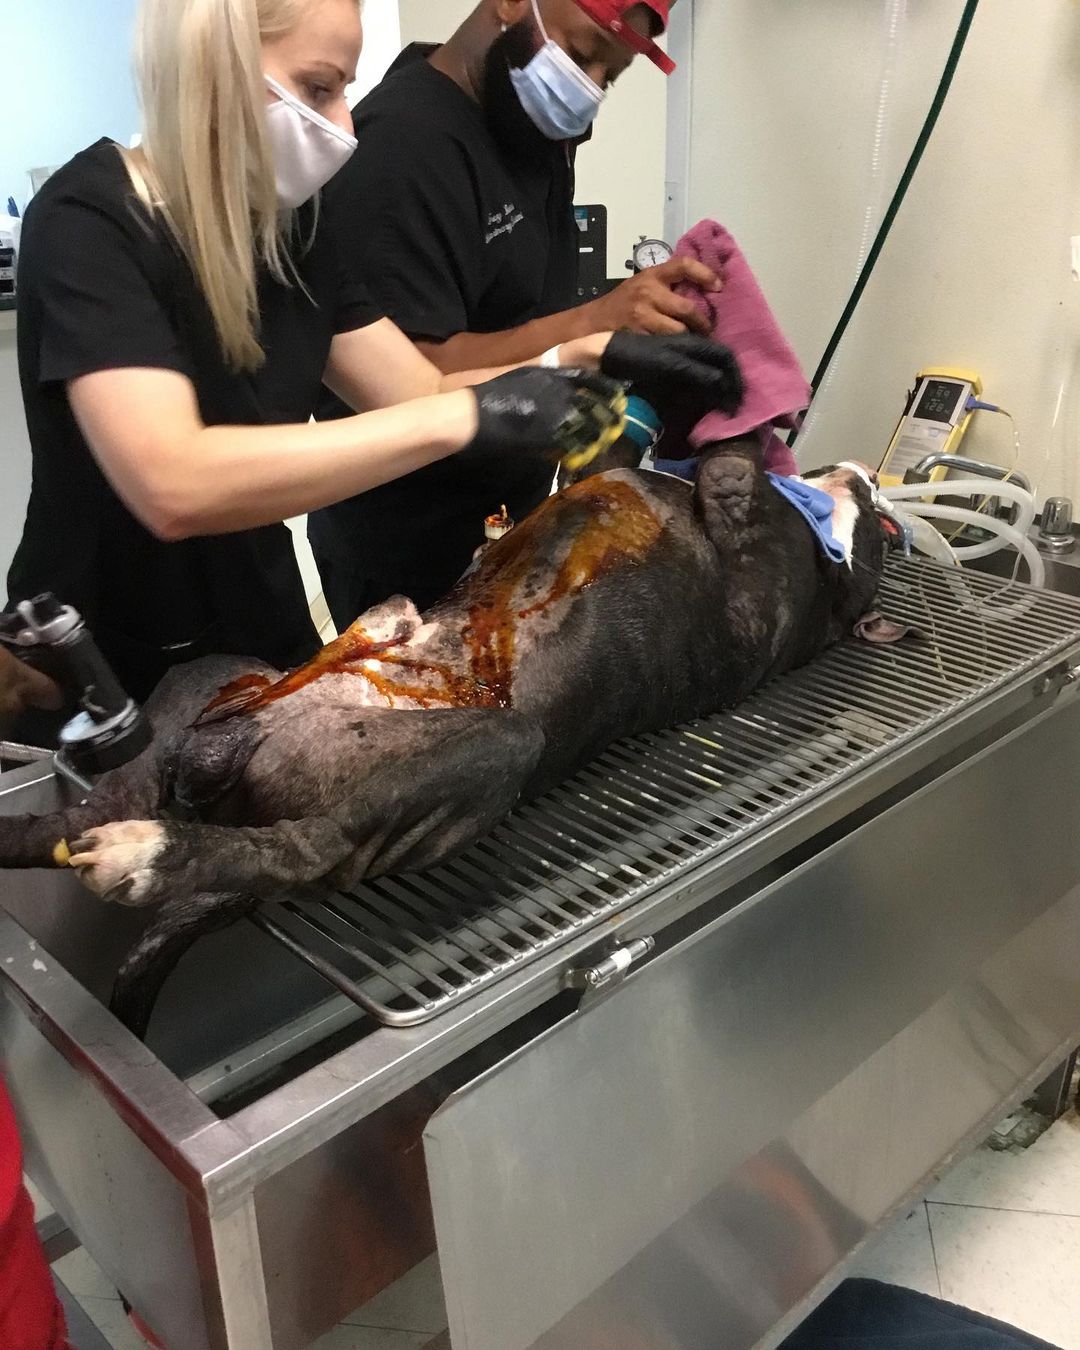 💔 Update on Buzz PART 2💔

BIG thanks to @blueclearsky2 @nickbrunson @paige_ah @paige_glumac and so many other amazing supporters for their generous donations. Lastly, huge thanks to our vet Dr. Huddleston and his staff at @westheimeranimal for always giving stellar care and service to our bullies for the past 8 years! This clinic will always do anything to save an animal. ❤️

Unfortunately, we still have a balance in our account which includes his cremation and urn. Thank you in advance for your help. No amount is too small. 
You may donate to our PayPal: 
info@ bravebullyrescue.org or you may donate directly to our vet clinic. Just say you will like to make a donation for BUZZ with Brave Bully Rescue:
Westheimer Animal Clinic Bellaire 
(713) 622-1270

Here is a quote we have always believed in since we started BBR 3/2014. This is why we do rescue.

💕